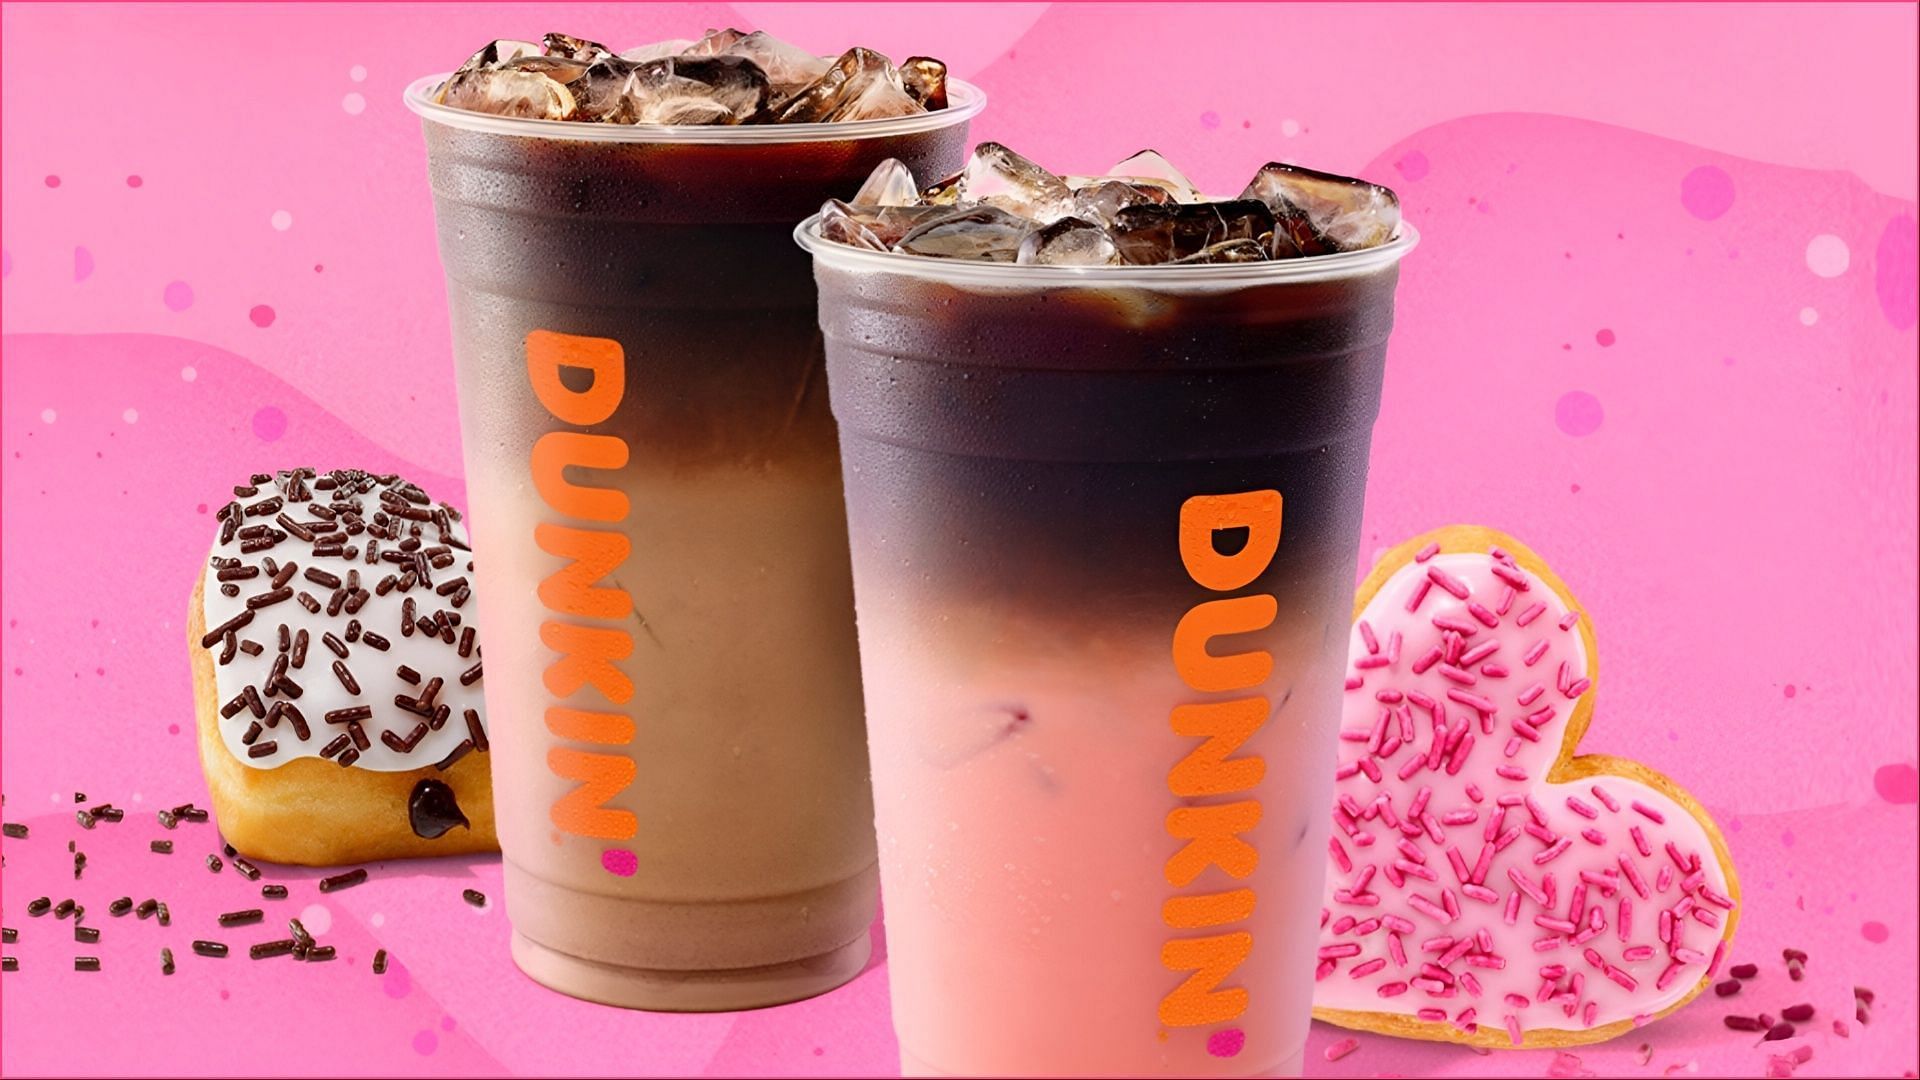 Dunkin&rsquo; introduces its Valentine